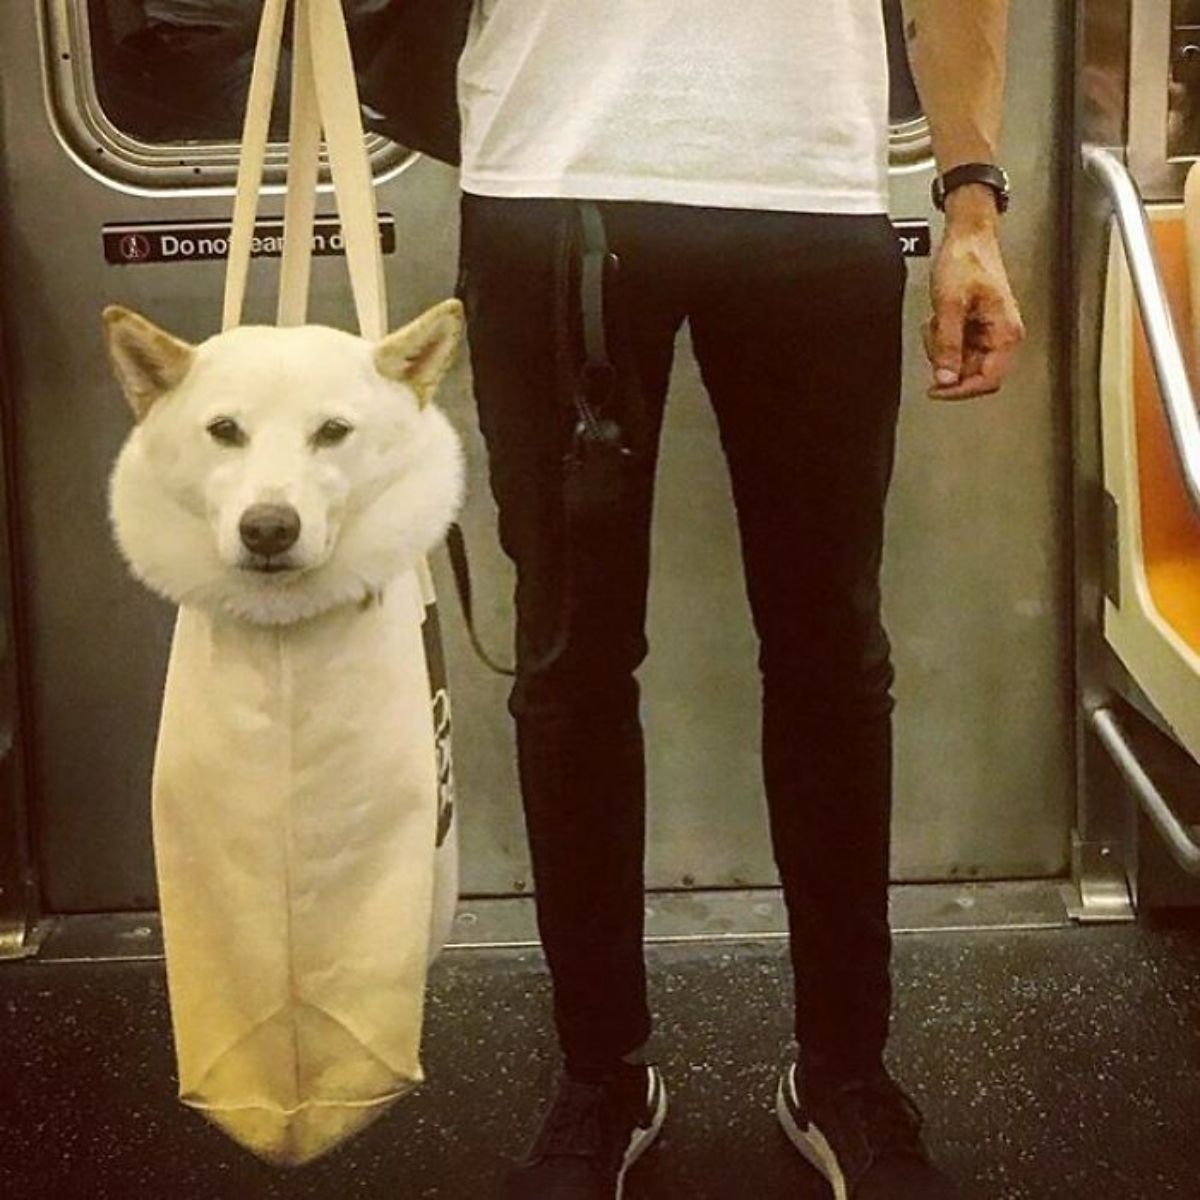 fluffy white dog with the head sticking out of a white cloth tote bag being carried by a person